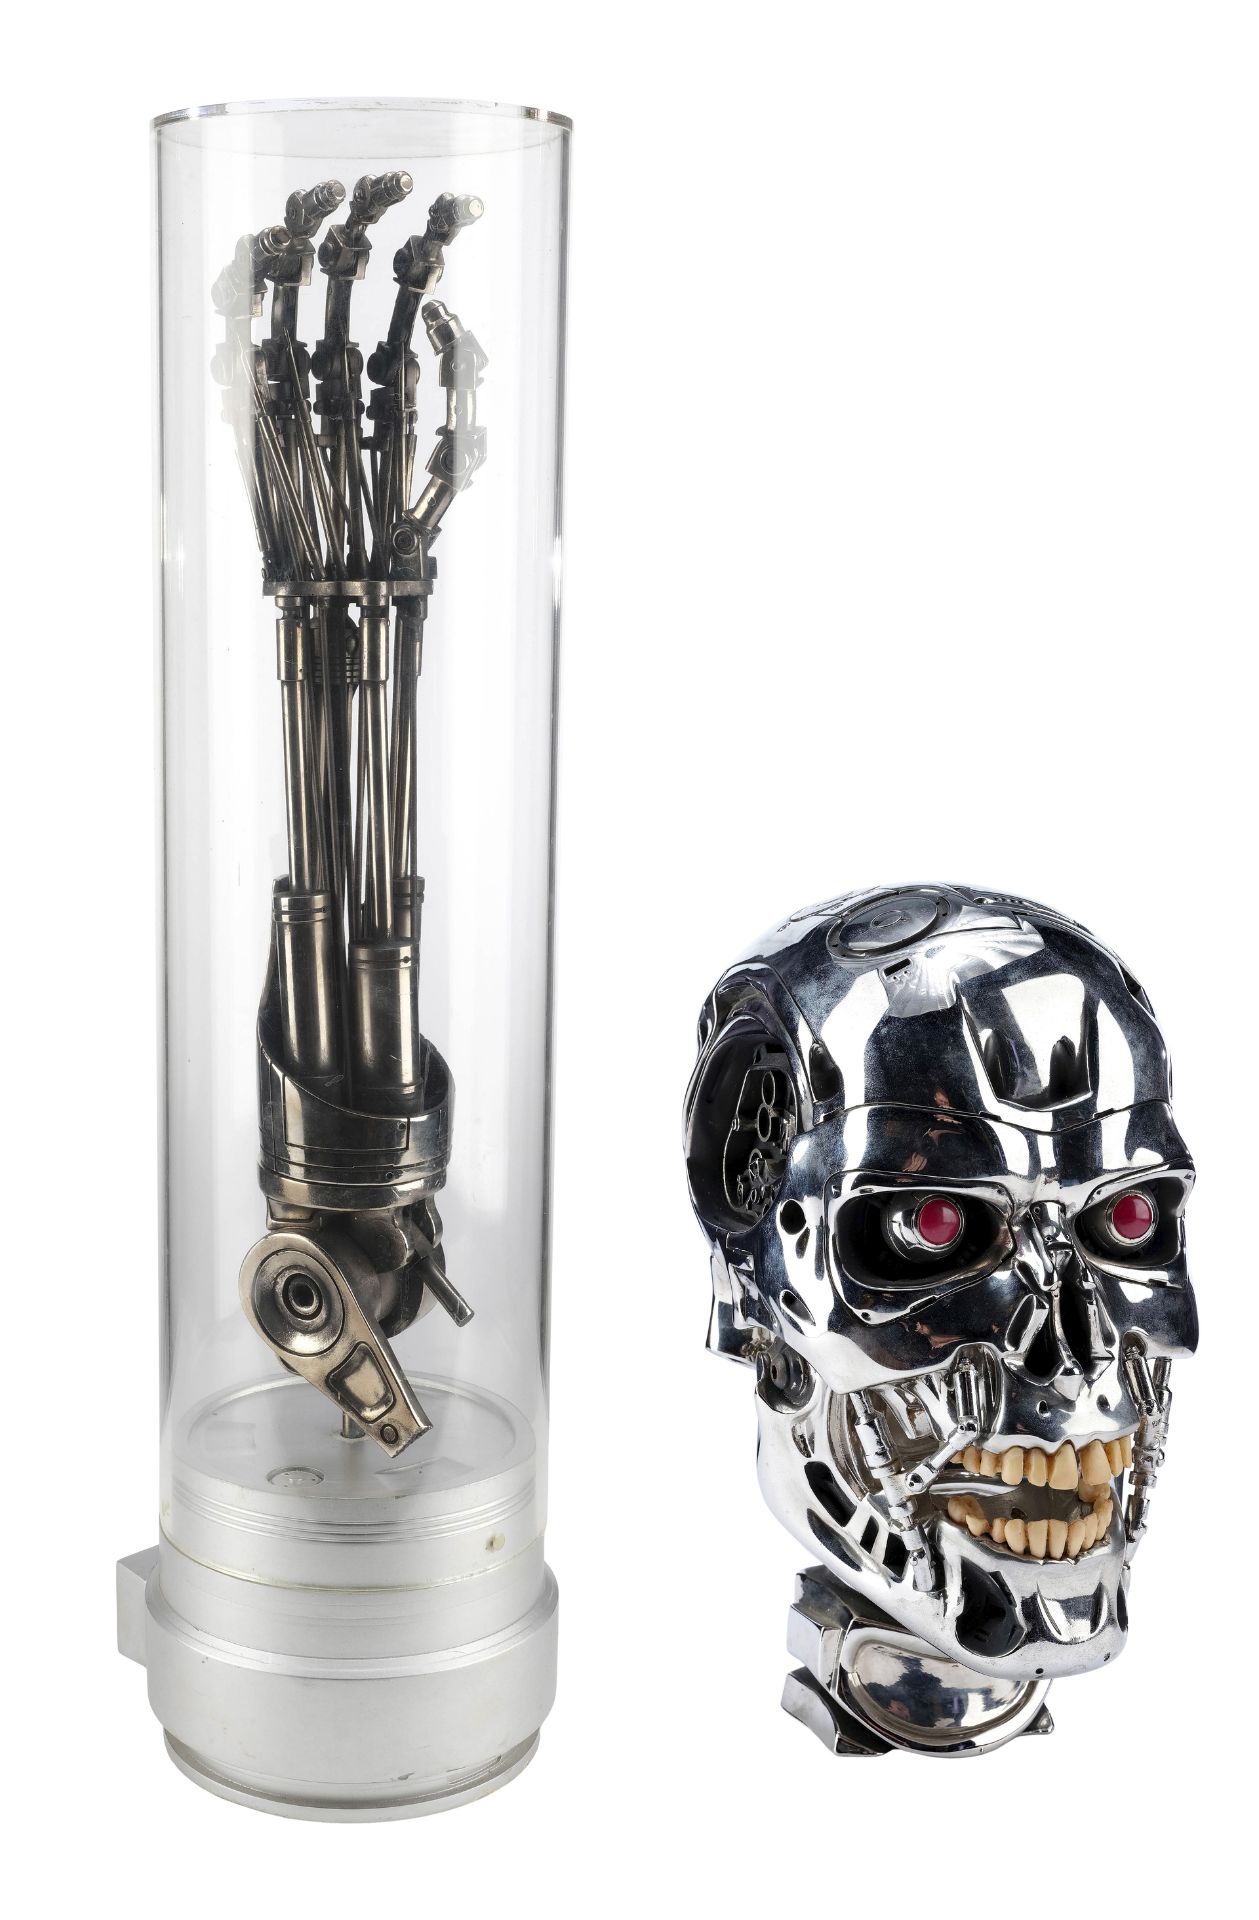 TERMINATOR 2: JUDGMENT DAY (1991) - ICONS Light-Up Prototype T-800 Endoskeleton Skull and Arm Replic